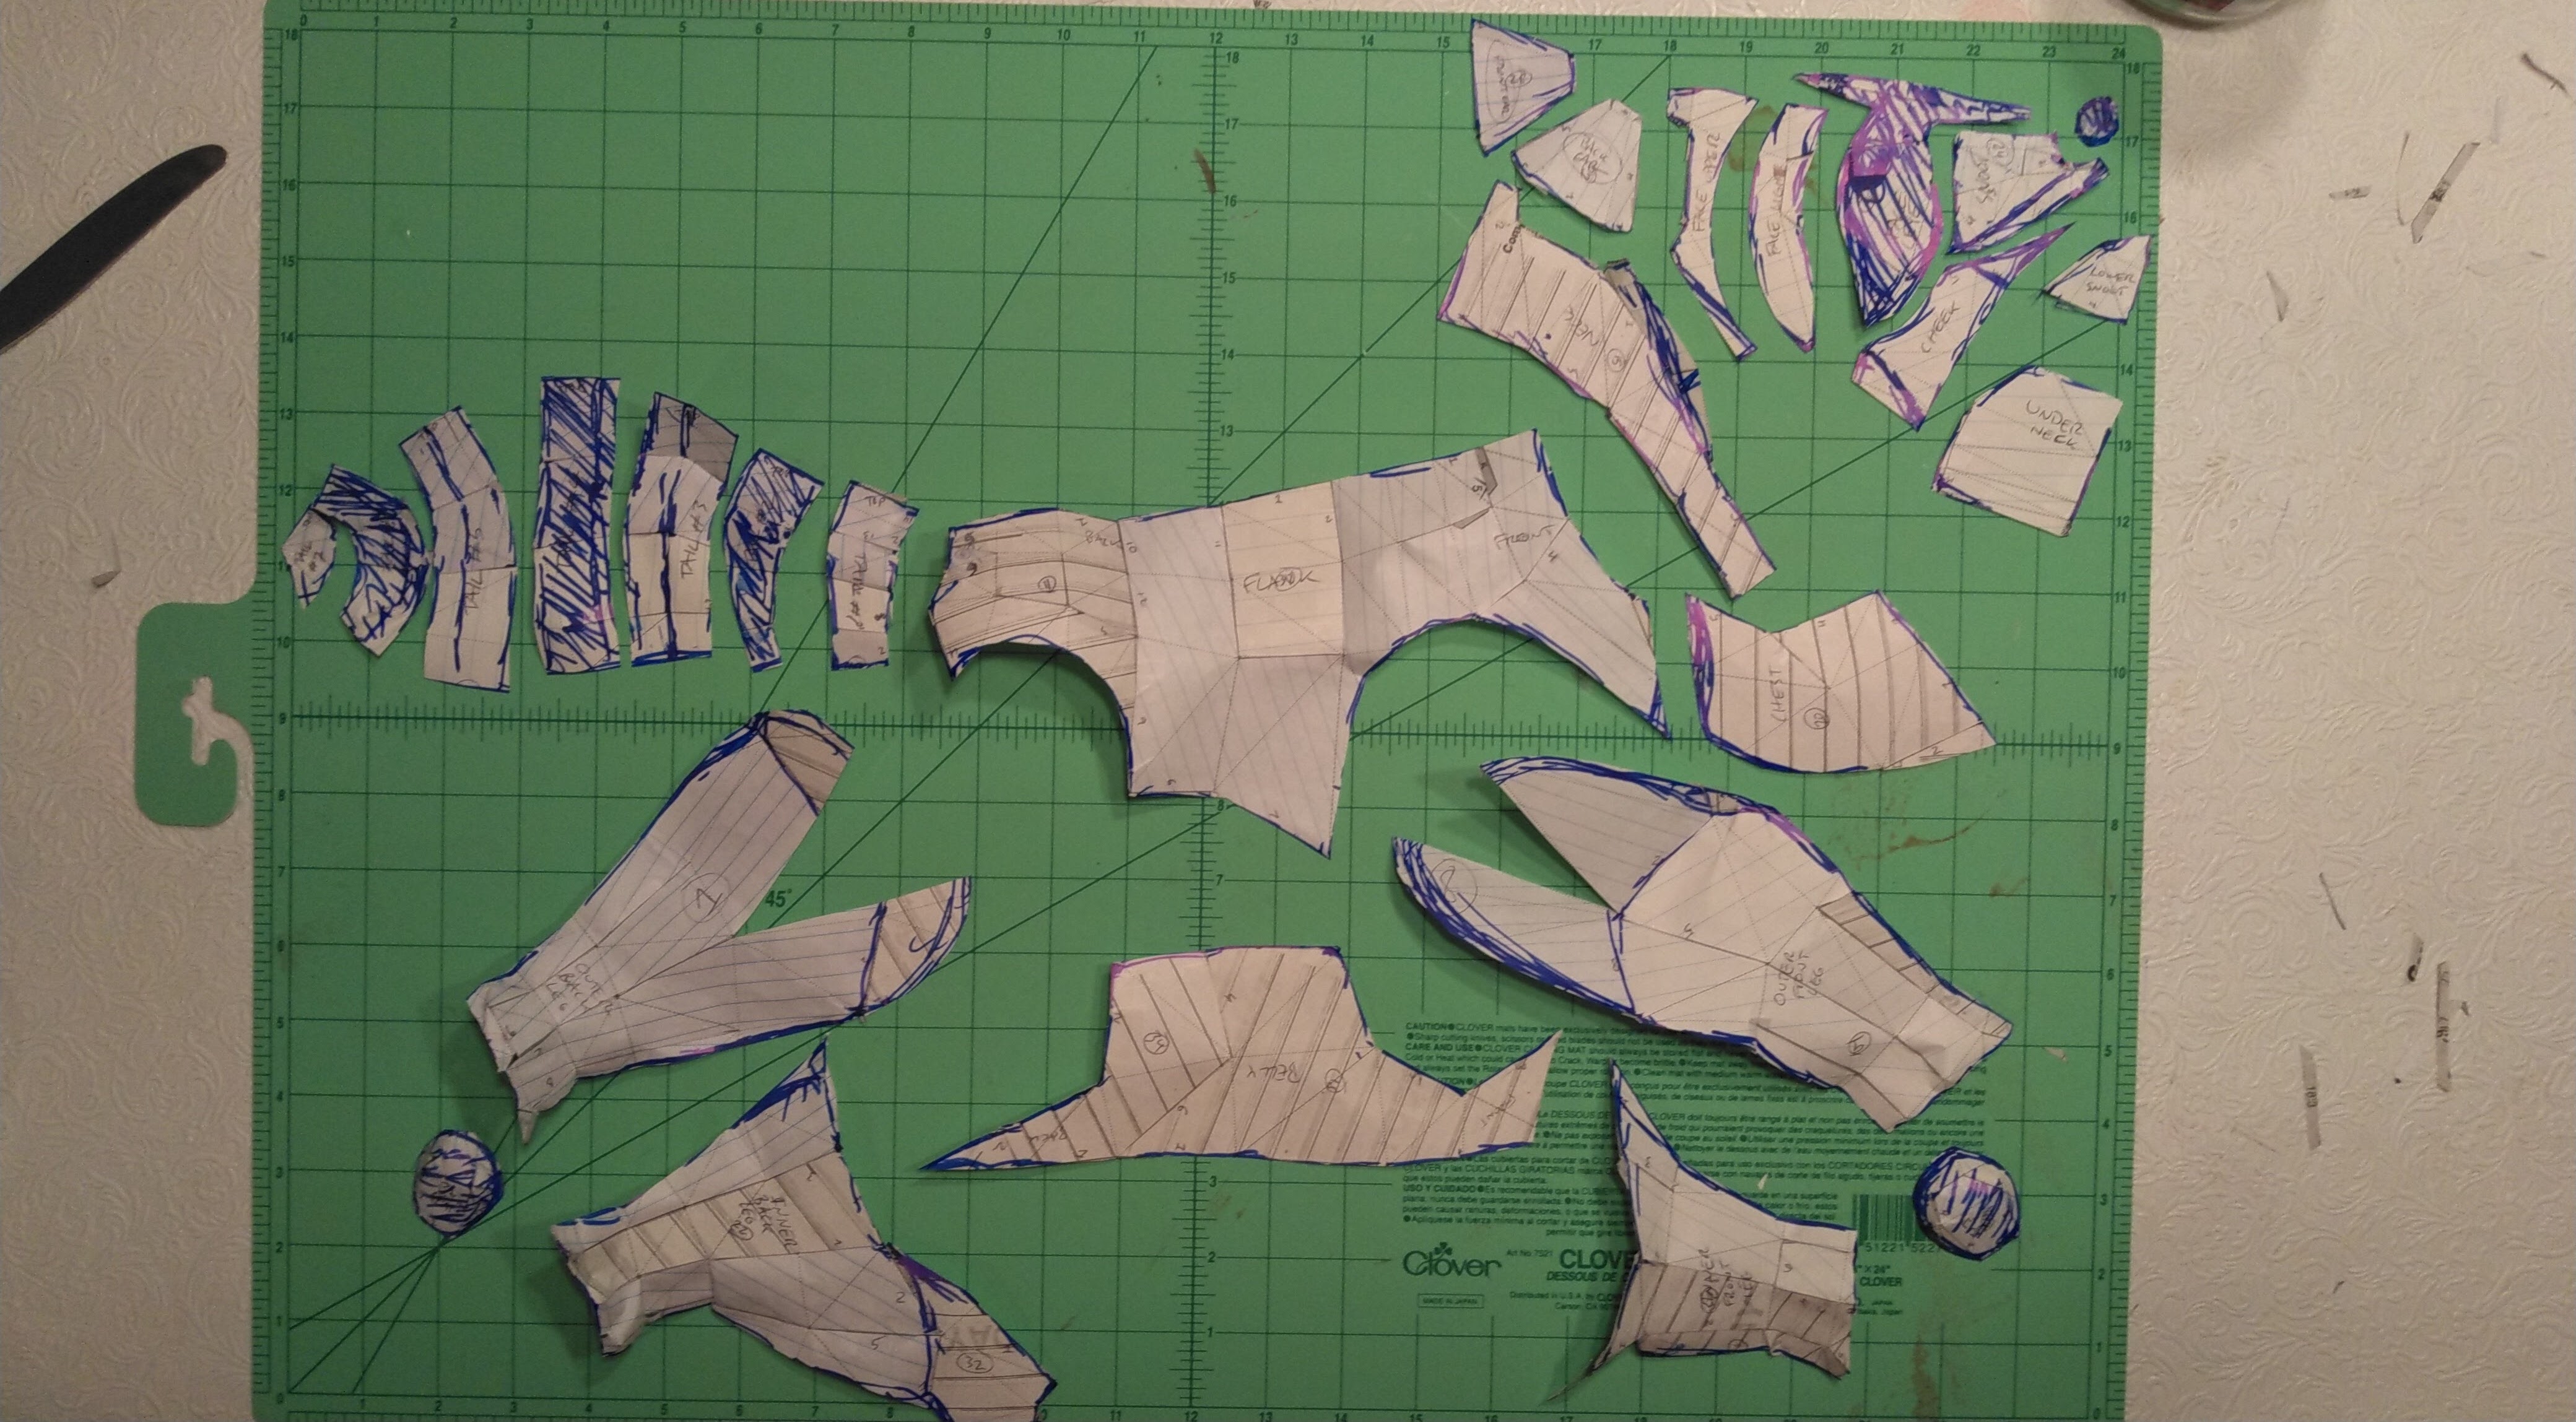 A paper model of a strong racoon cut into roughly flat pieces